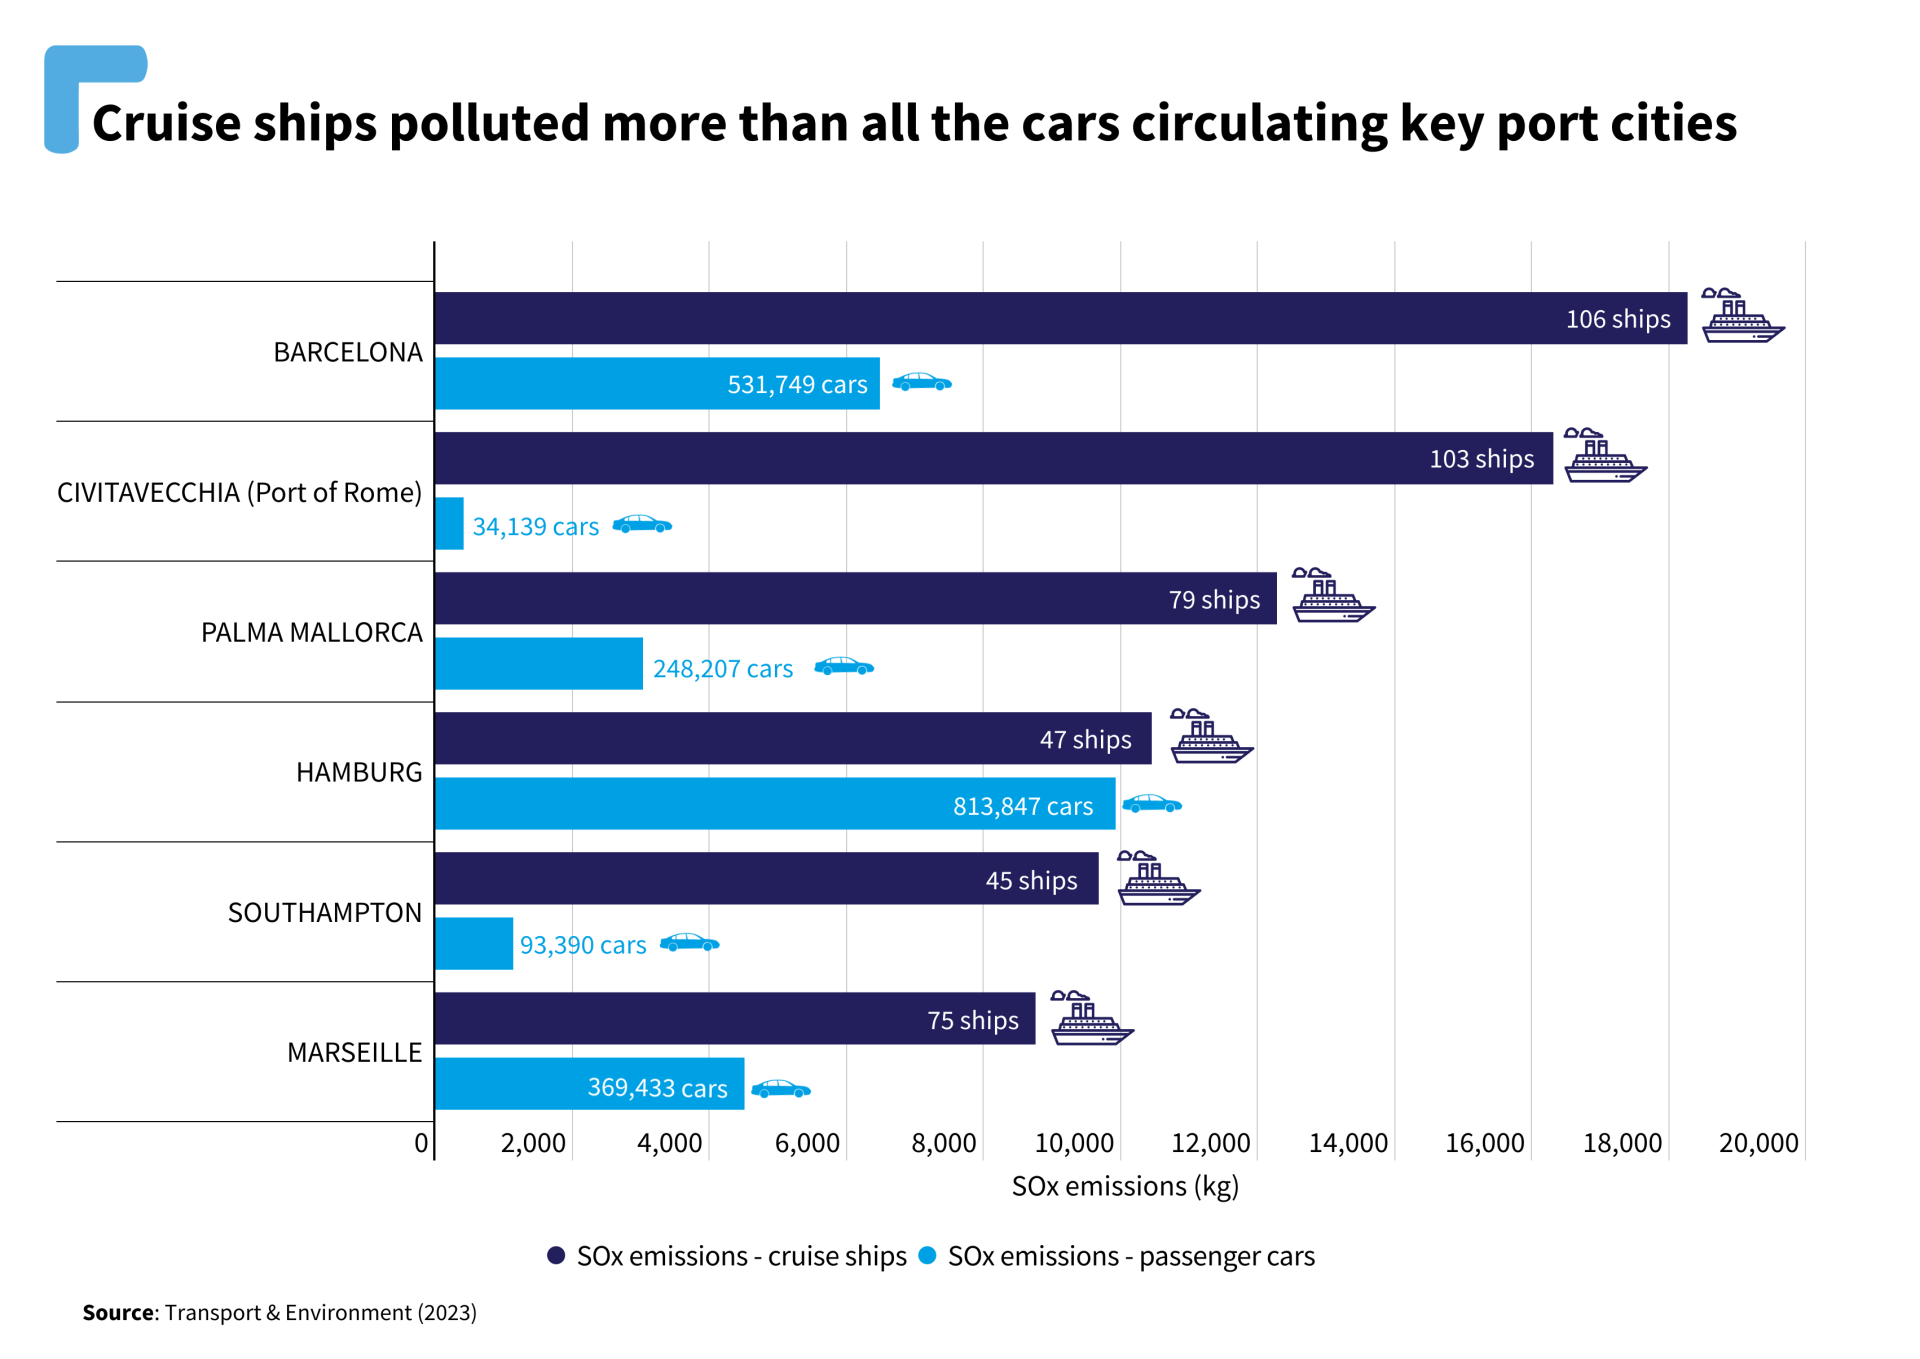 Cruise ships polluted more than all the cars circulating key port cities